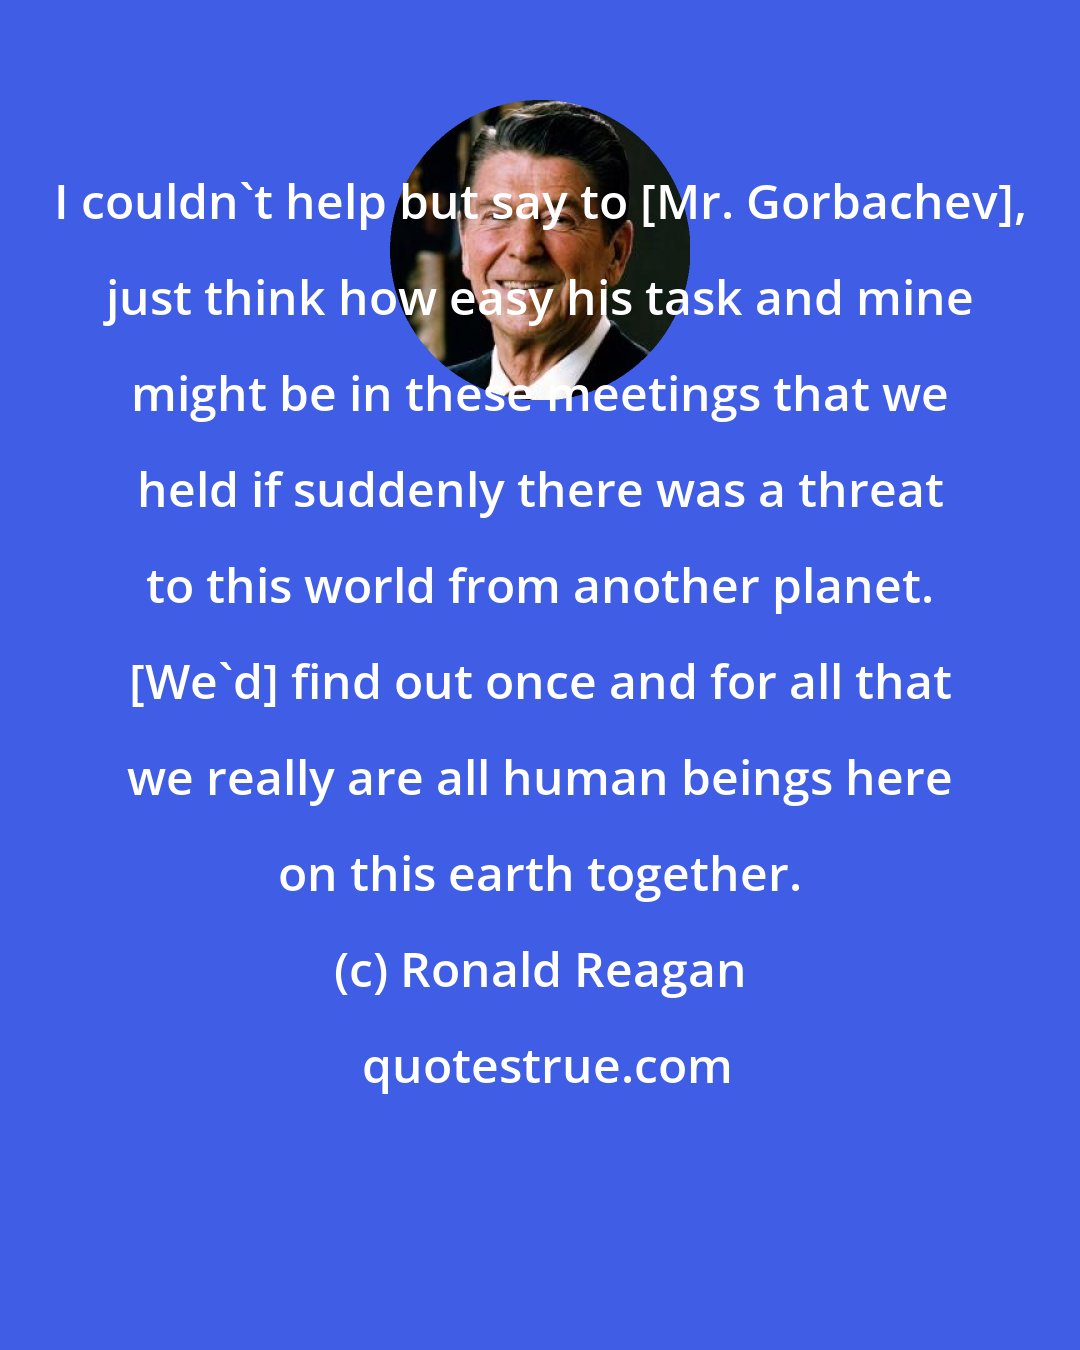 Ronald Reagan: I couldn't help but say to [Mr. Gorbachev], just think how easy his task and mine might be in these meetings that we held if suddenly there was a threat to this world from another planet. [We'd] find out once and for all that we really are all human beings here on this earth together.